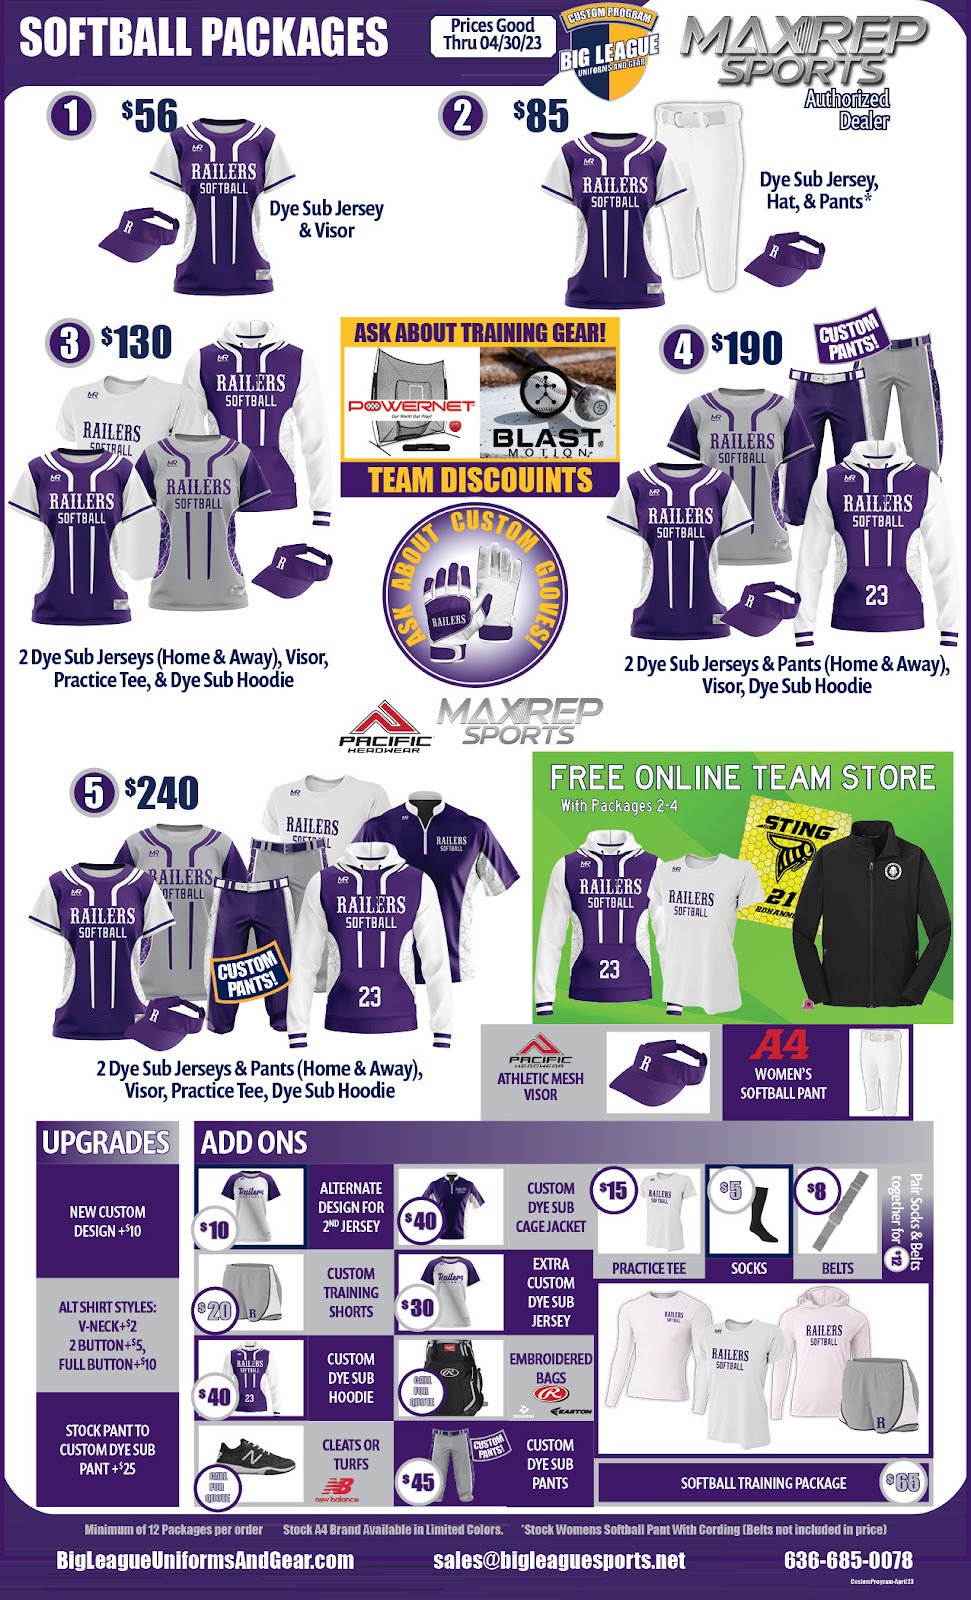 Big League Uniforms and Gear | 3675 New Town Blvd, St Charles, MO 63301, USA | Phone: (636) 685-0078